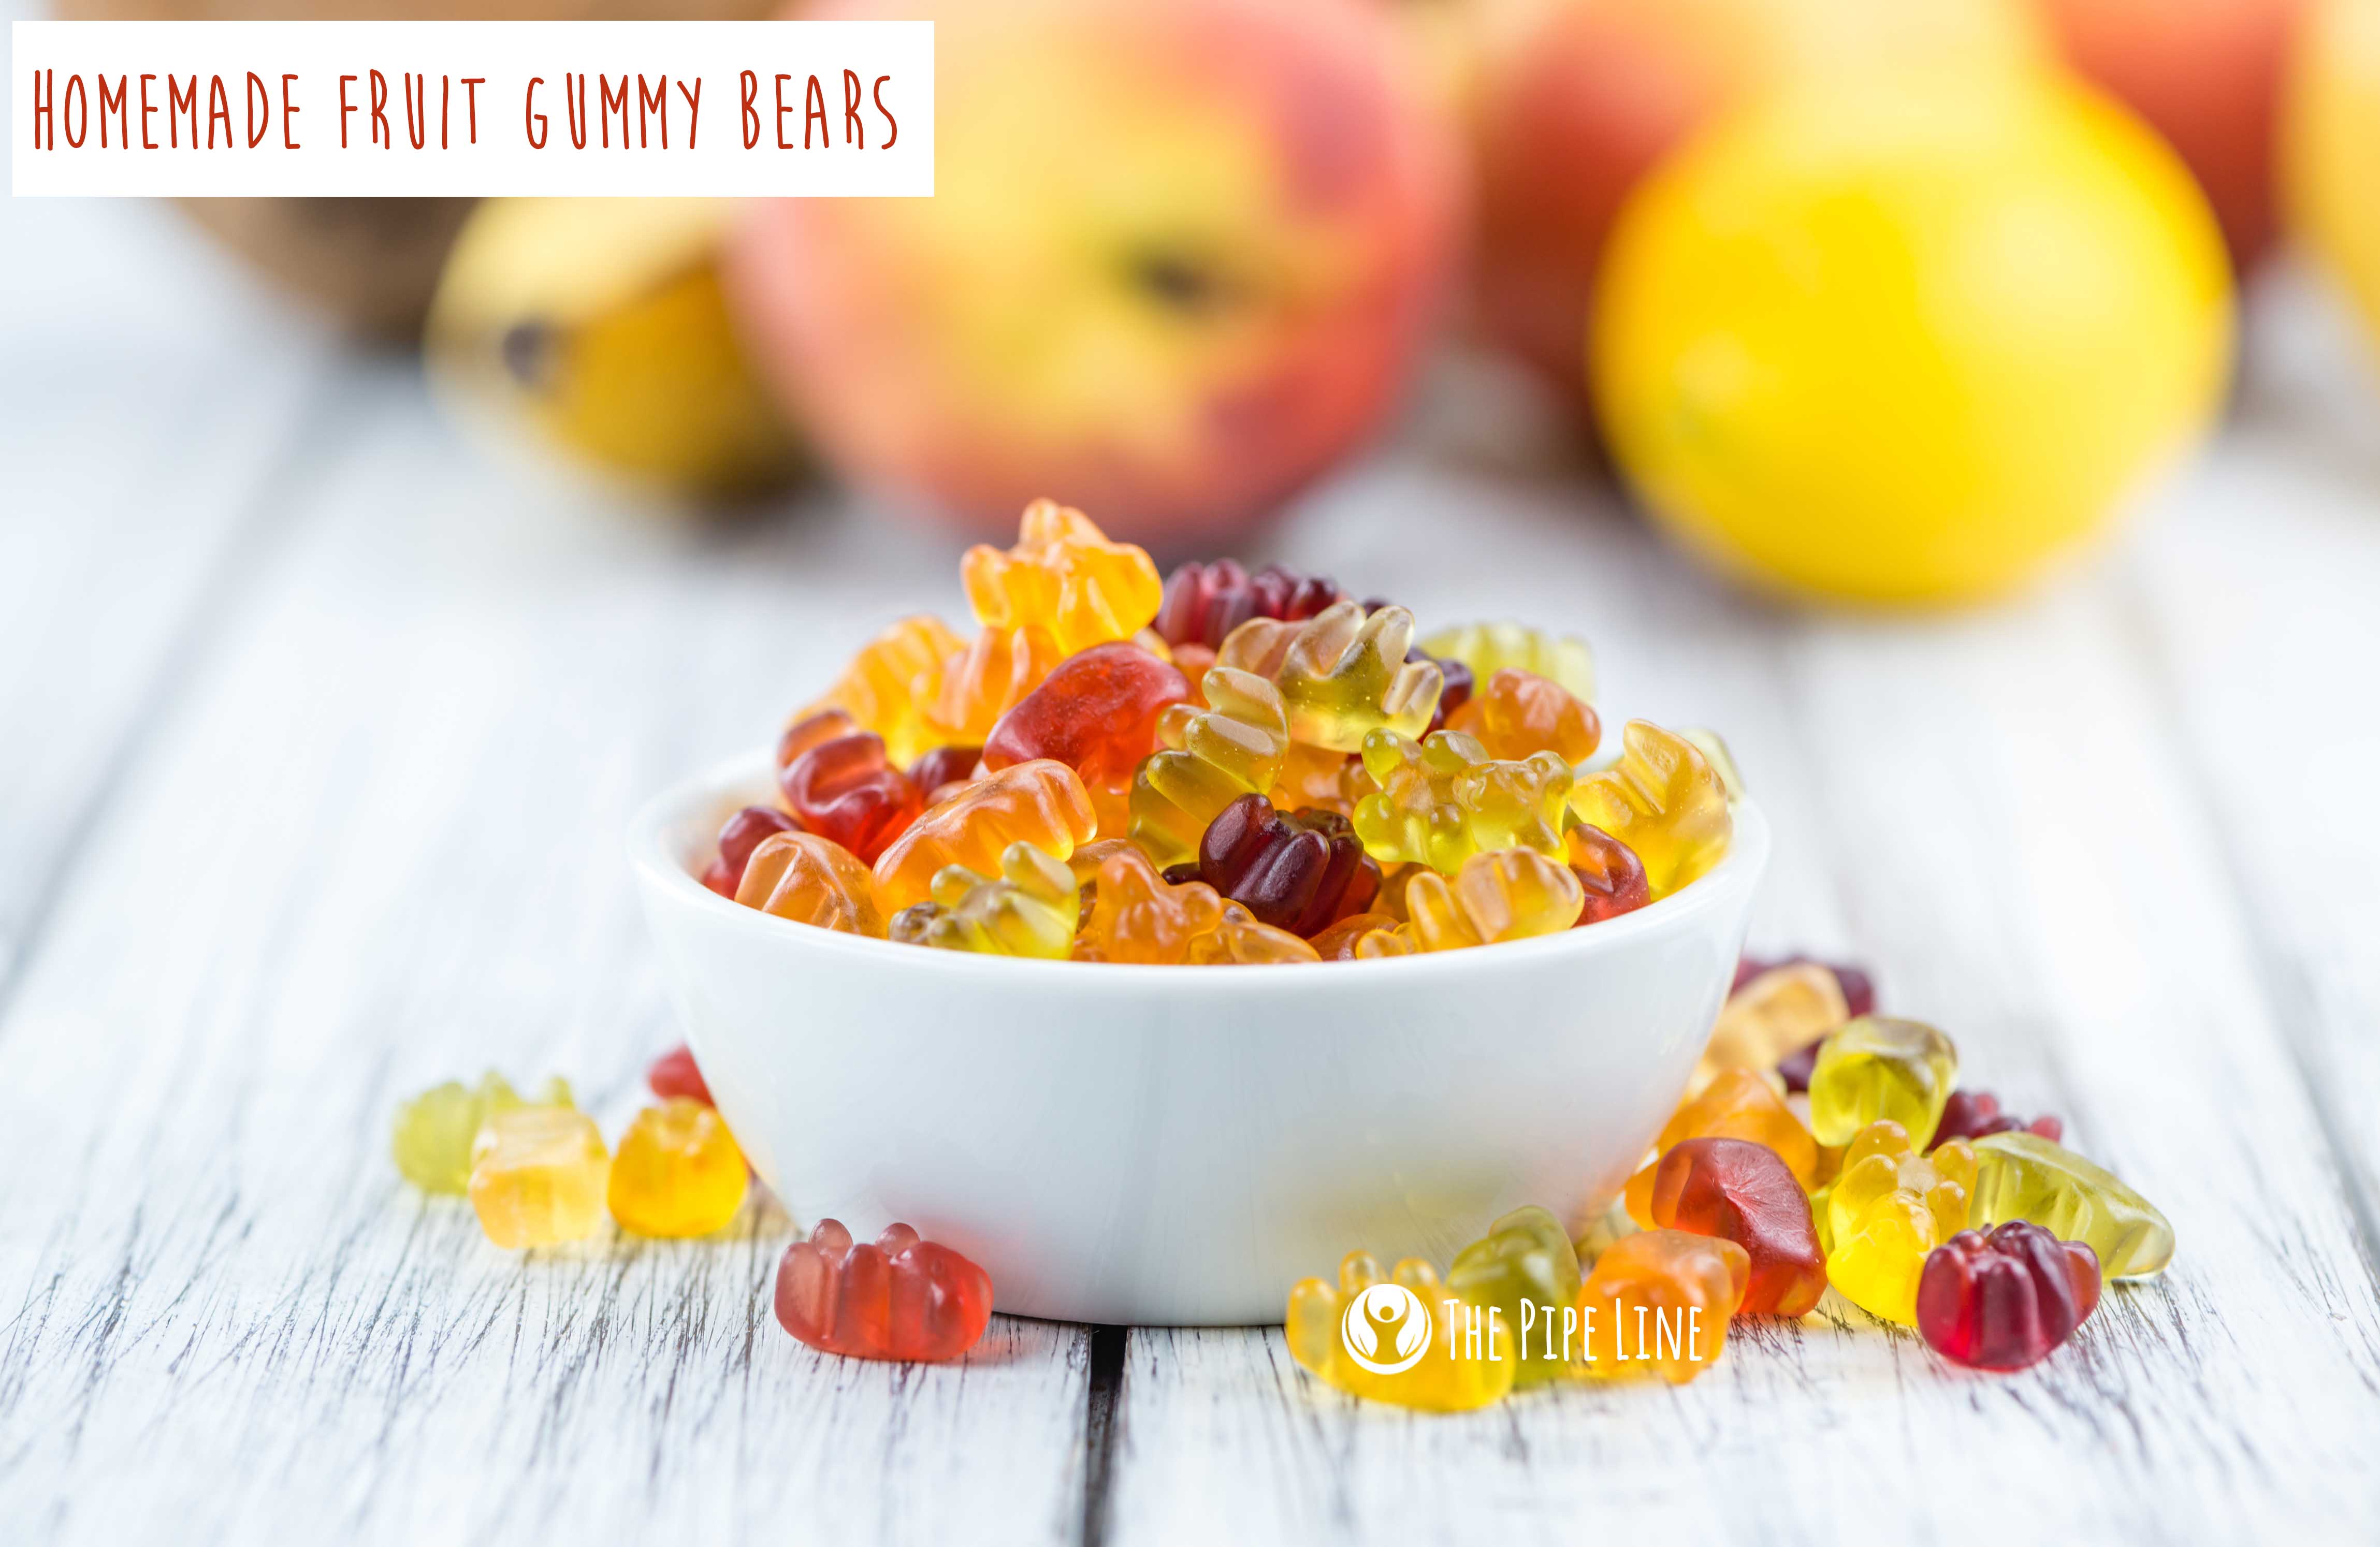 If You LOVE Gummy Bears, You’re Going To Love This